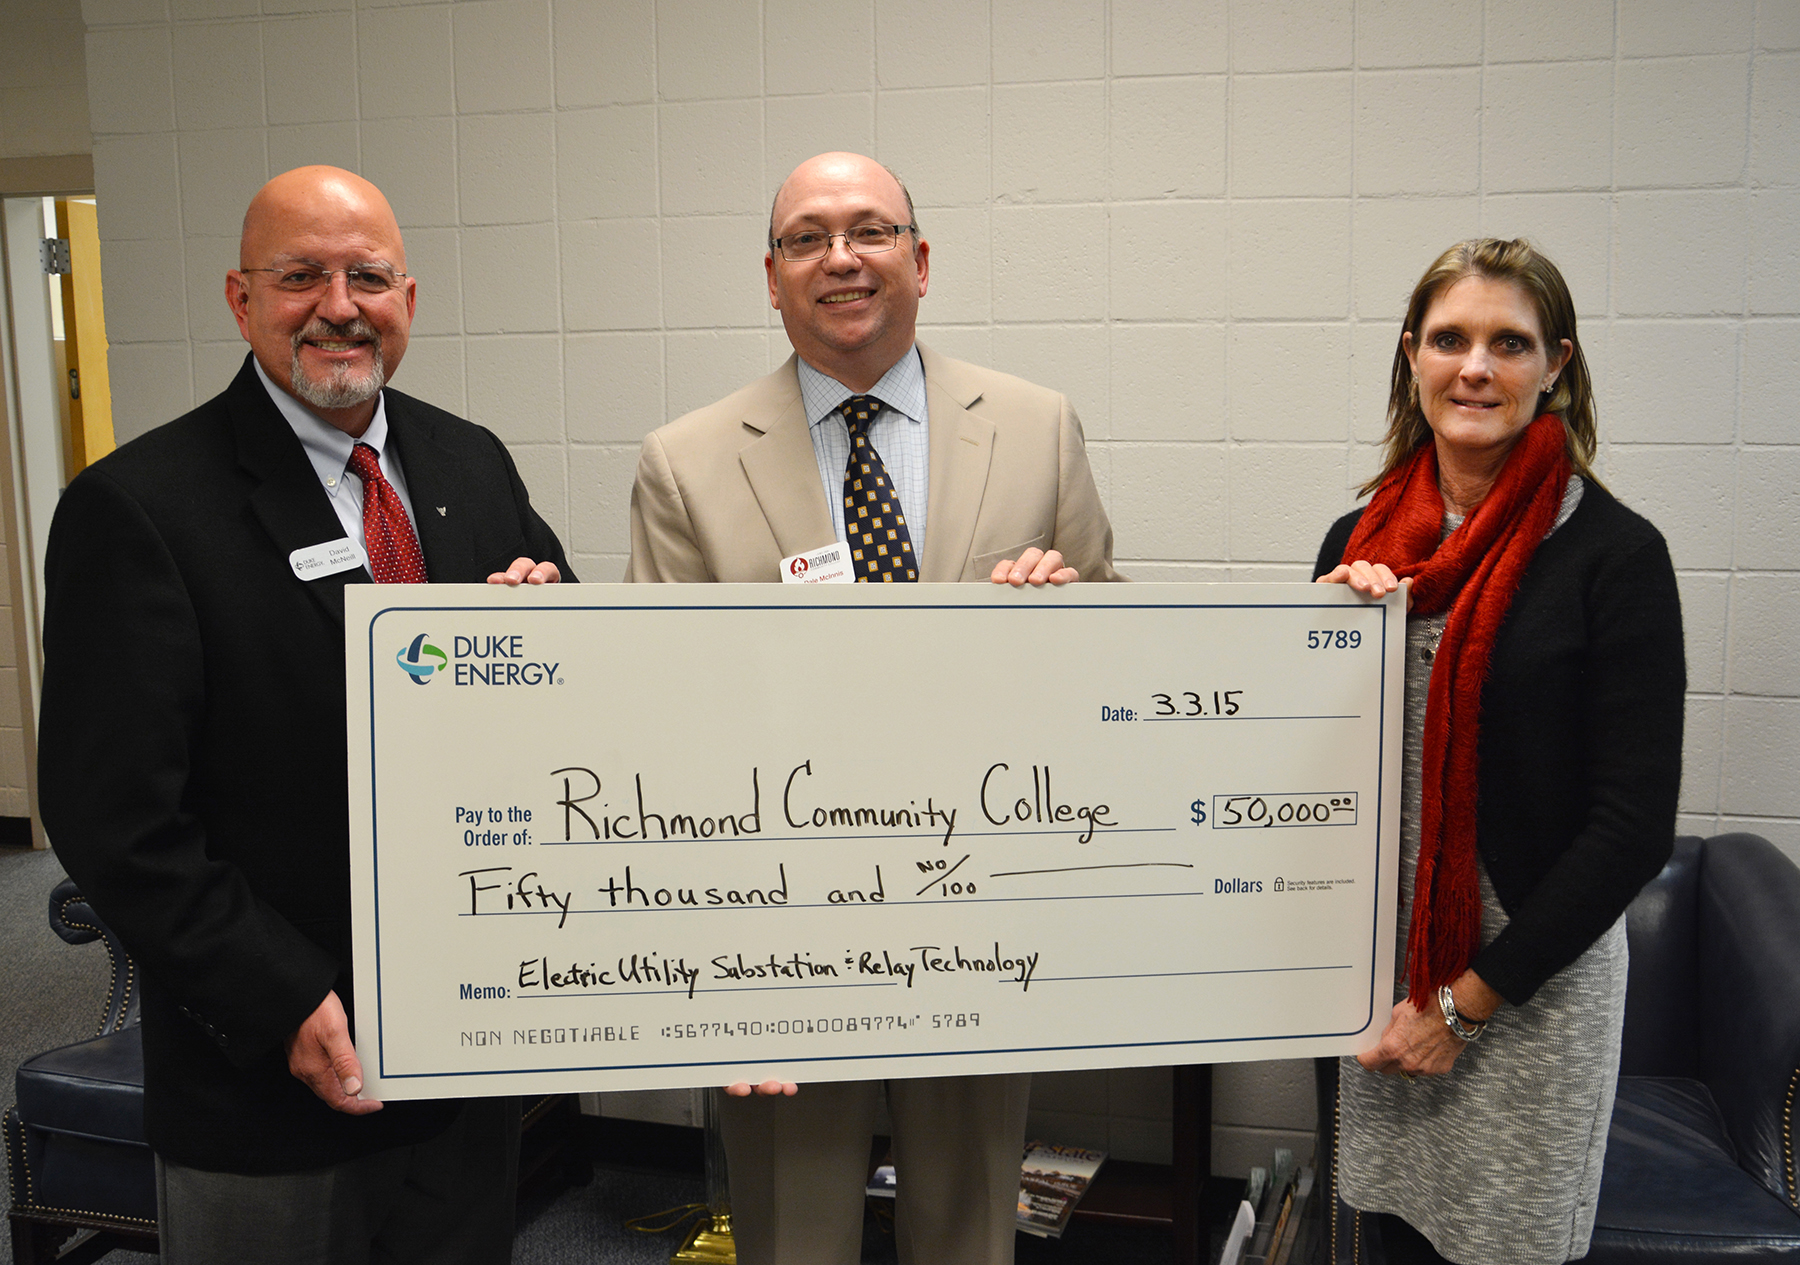 Pictured above from left, Duke Energy District Manager David McNeill presents a grant check to Richmond Community College President Dr. Dale McInnis and RCC Board Chair Claudia Robinette to support the College’s Electric Utility Substation and Relay Technology (EUSRT) program.